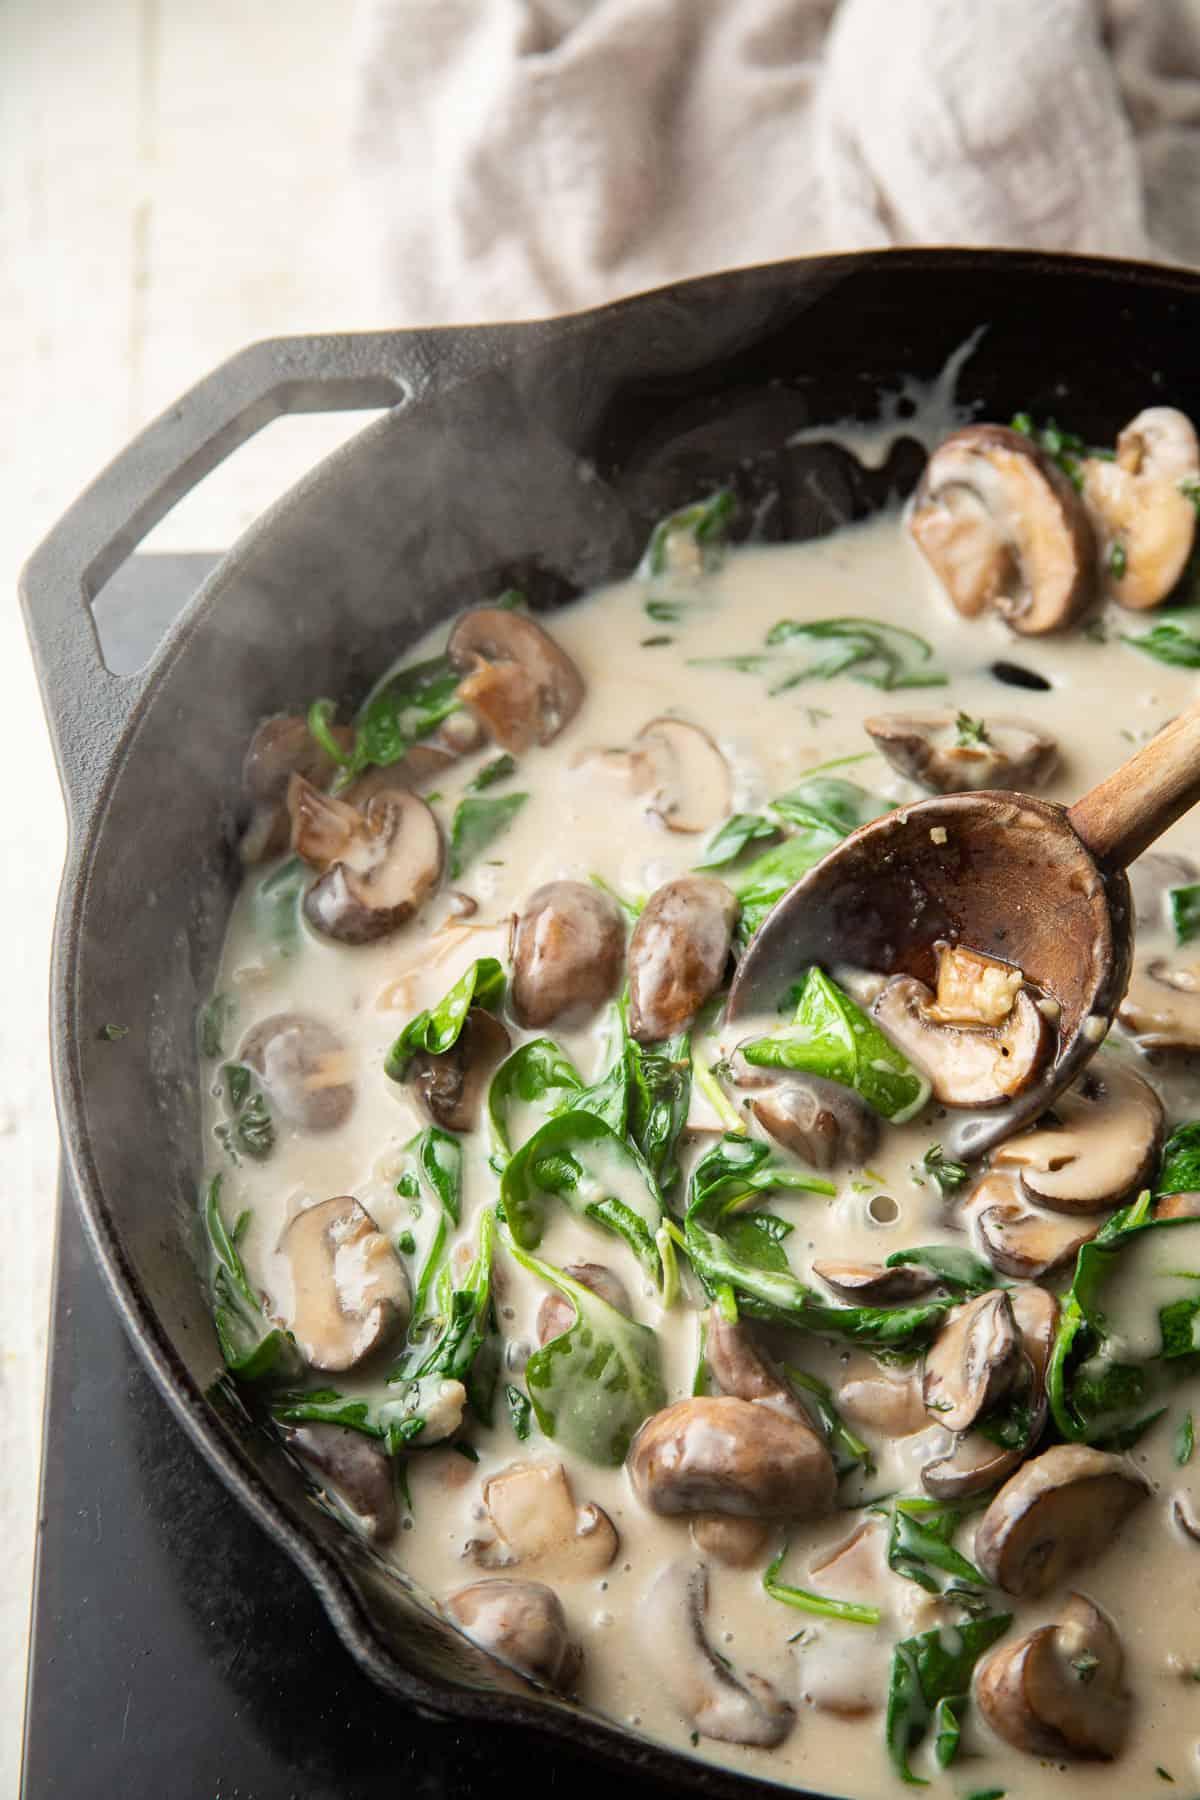 Mushrooms and spinach cooked in a creamy sauce in a skillet.